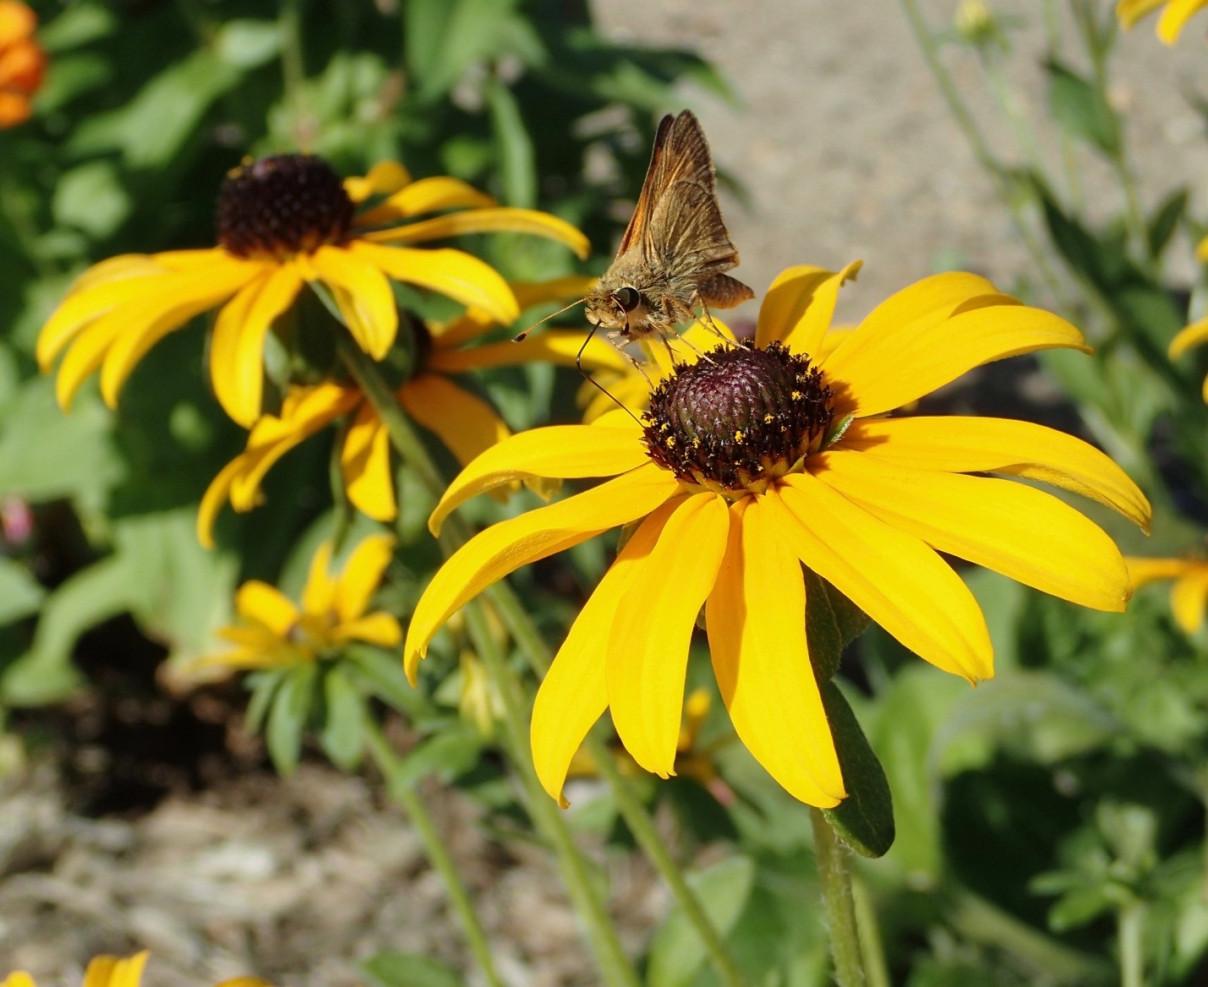 skipper insect on a black-eyed susan flower